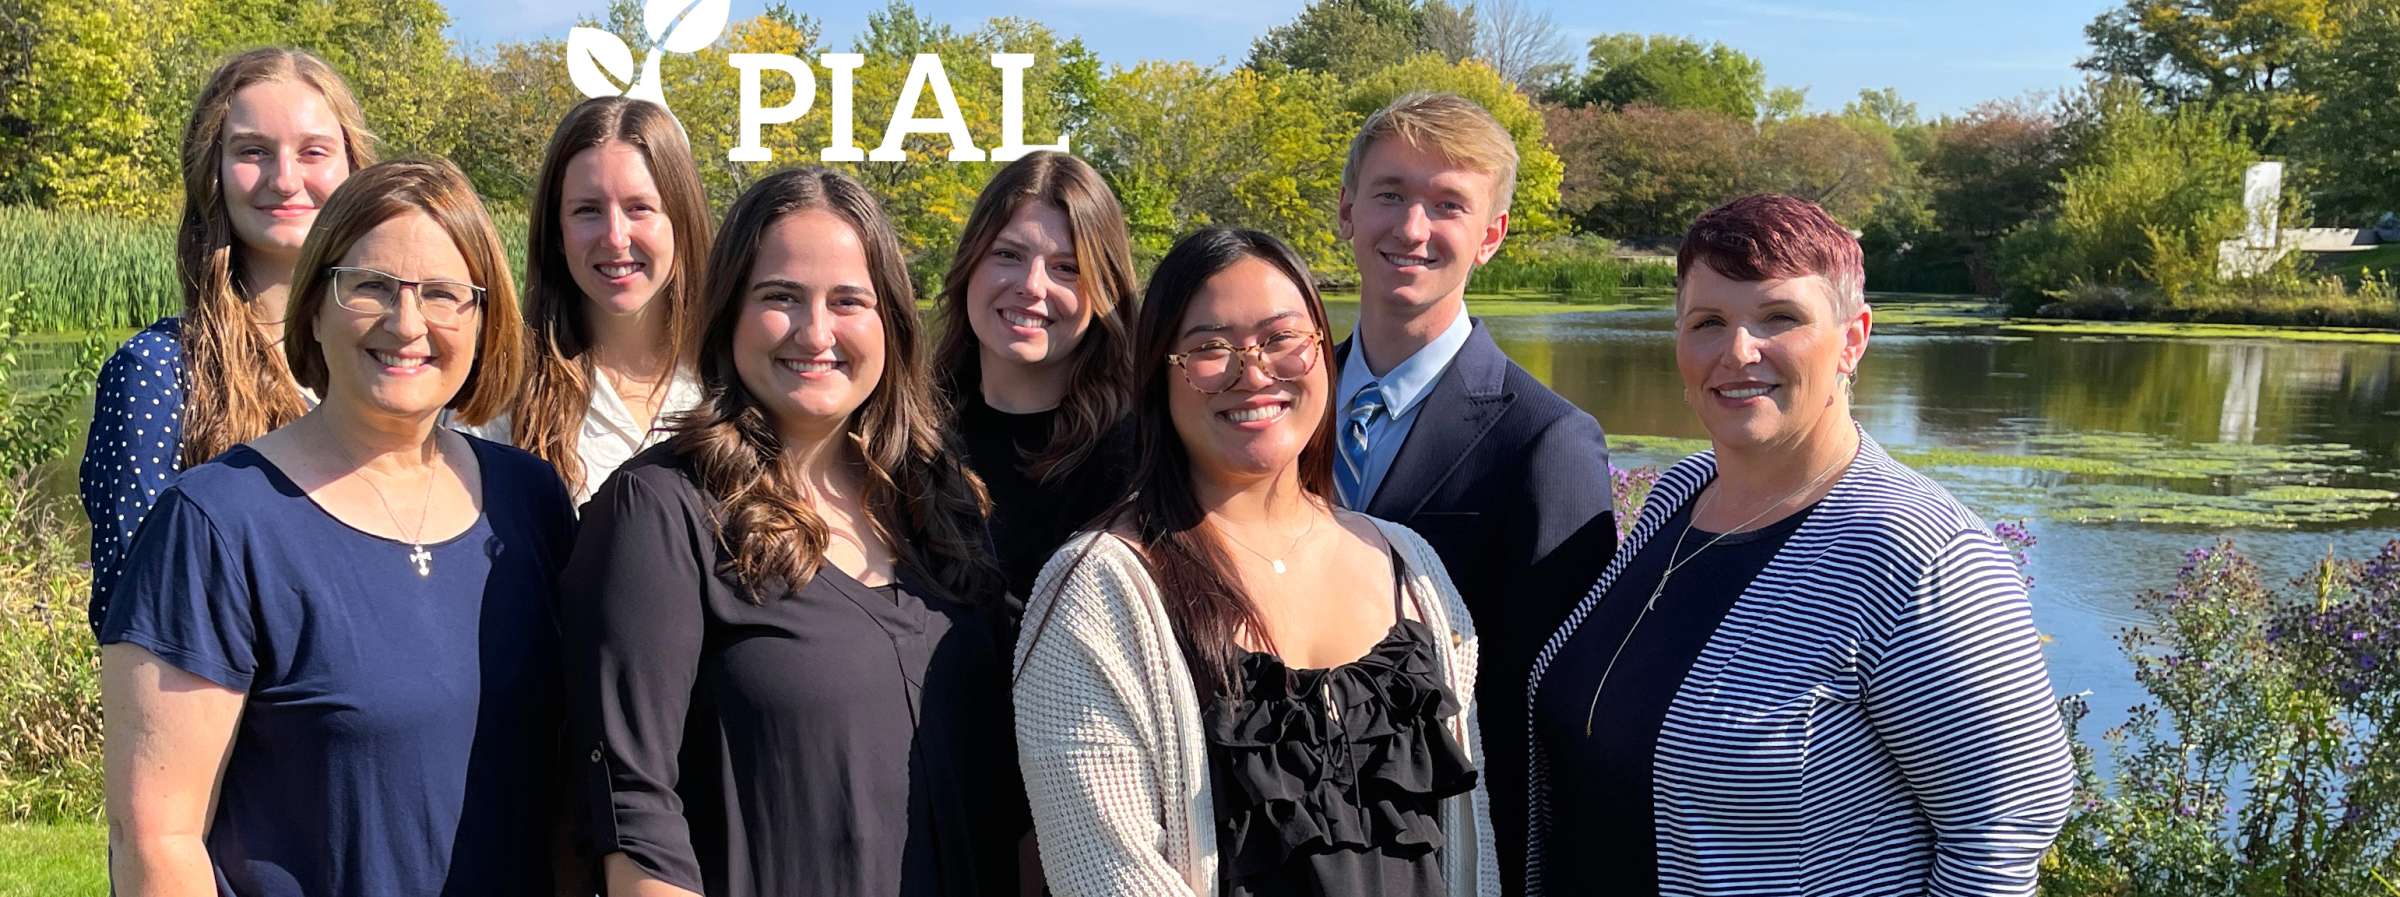 The FY24 PIAL team standing outside by a pond and smiling at the camera.